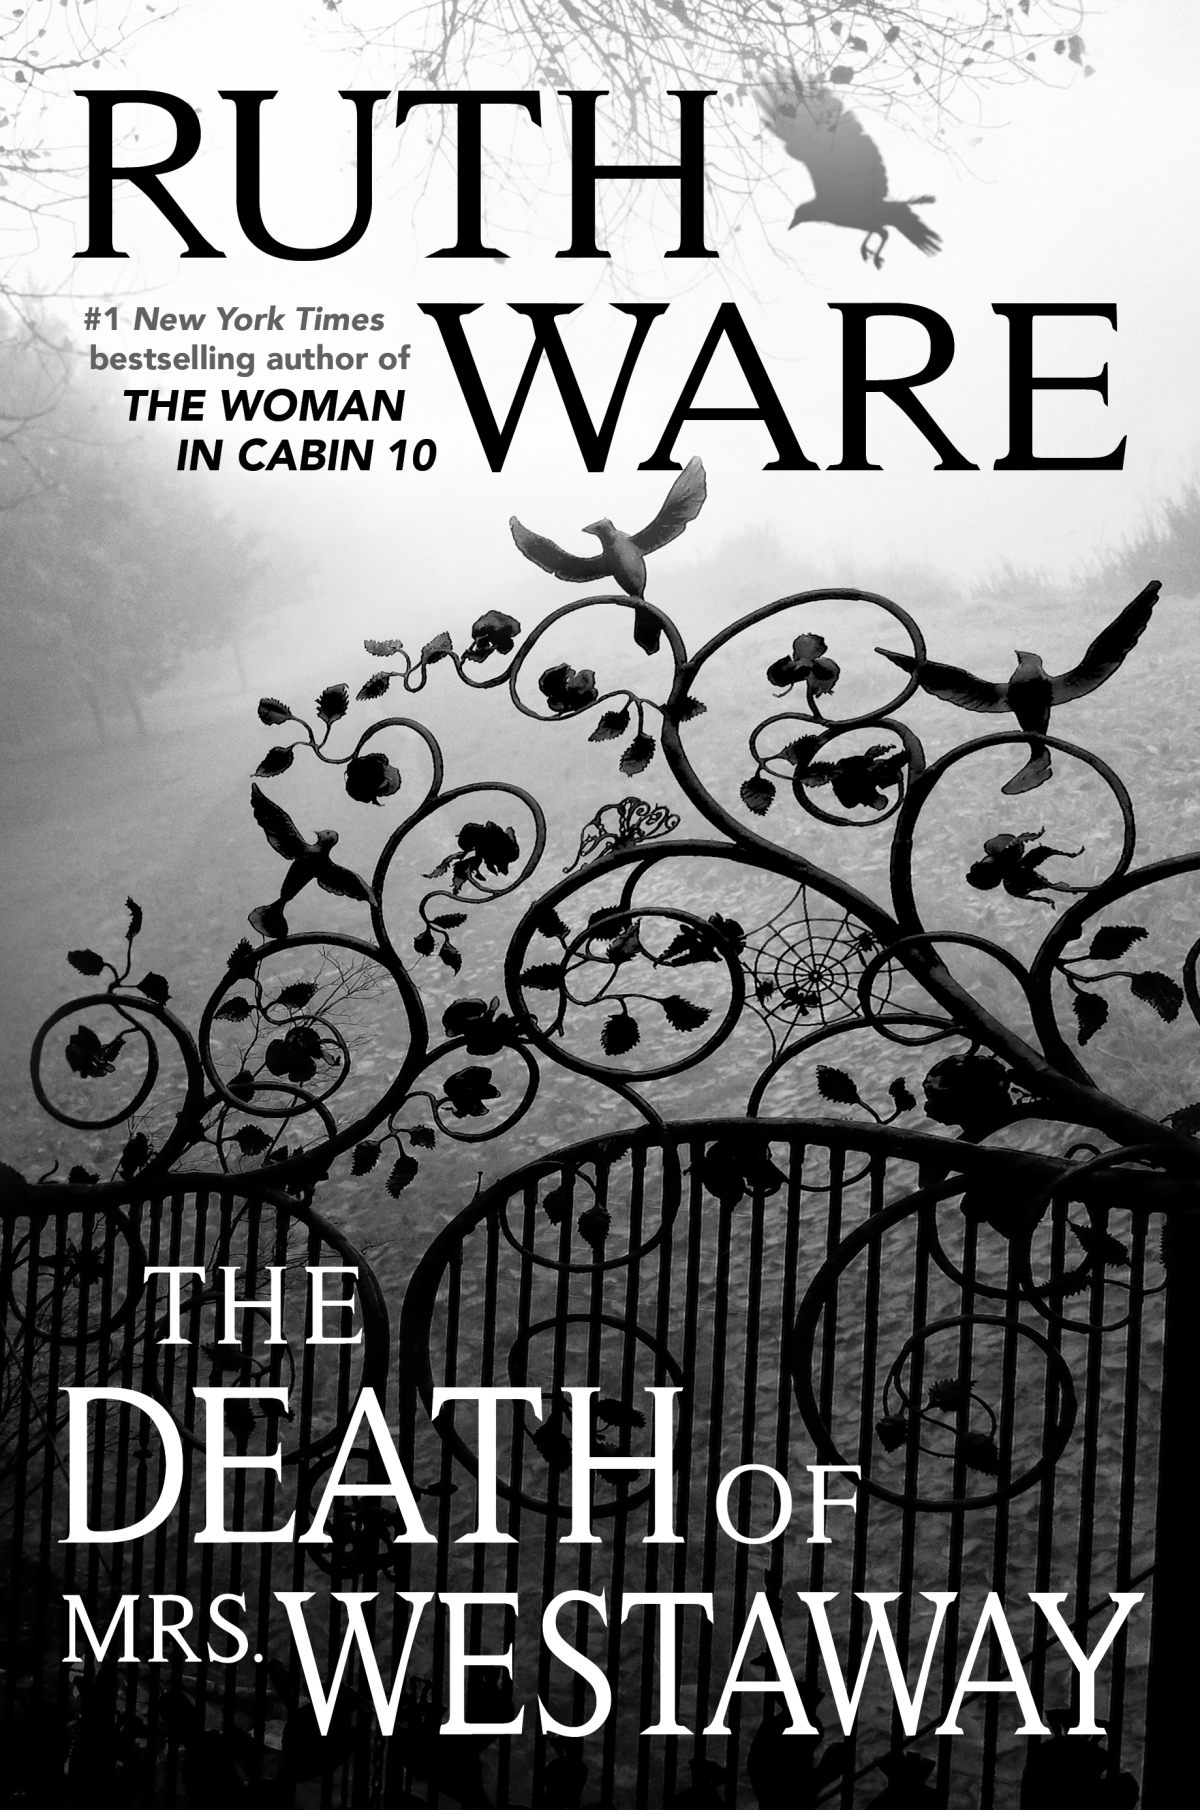 The Death of Mrs. Westaway: A New Psychological Thriller by Ruth Ware